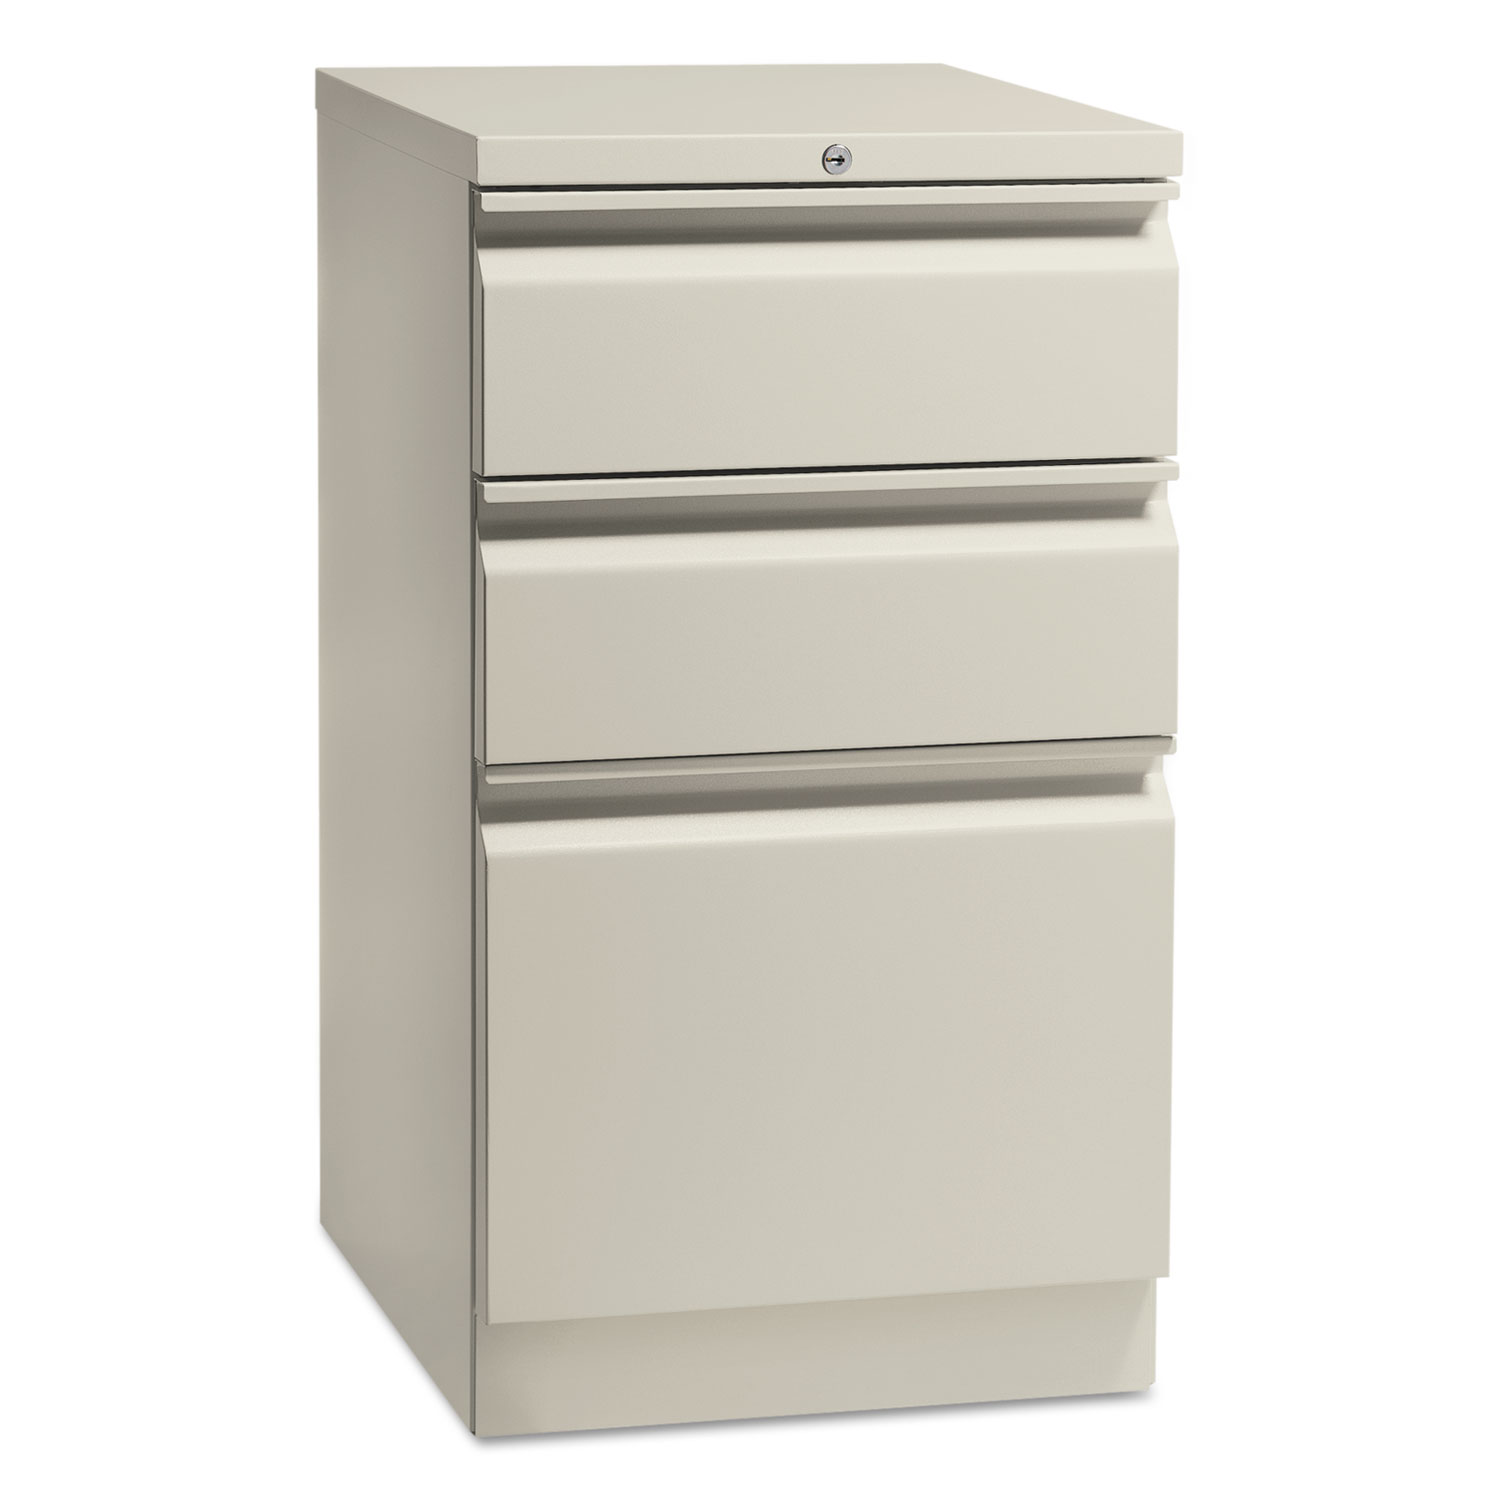 Flagship Mobile Box/Box/File Pedestal with R Pulls, 15w x 16 7/8d, Light Gray